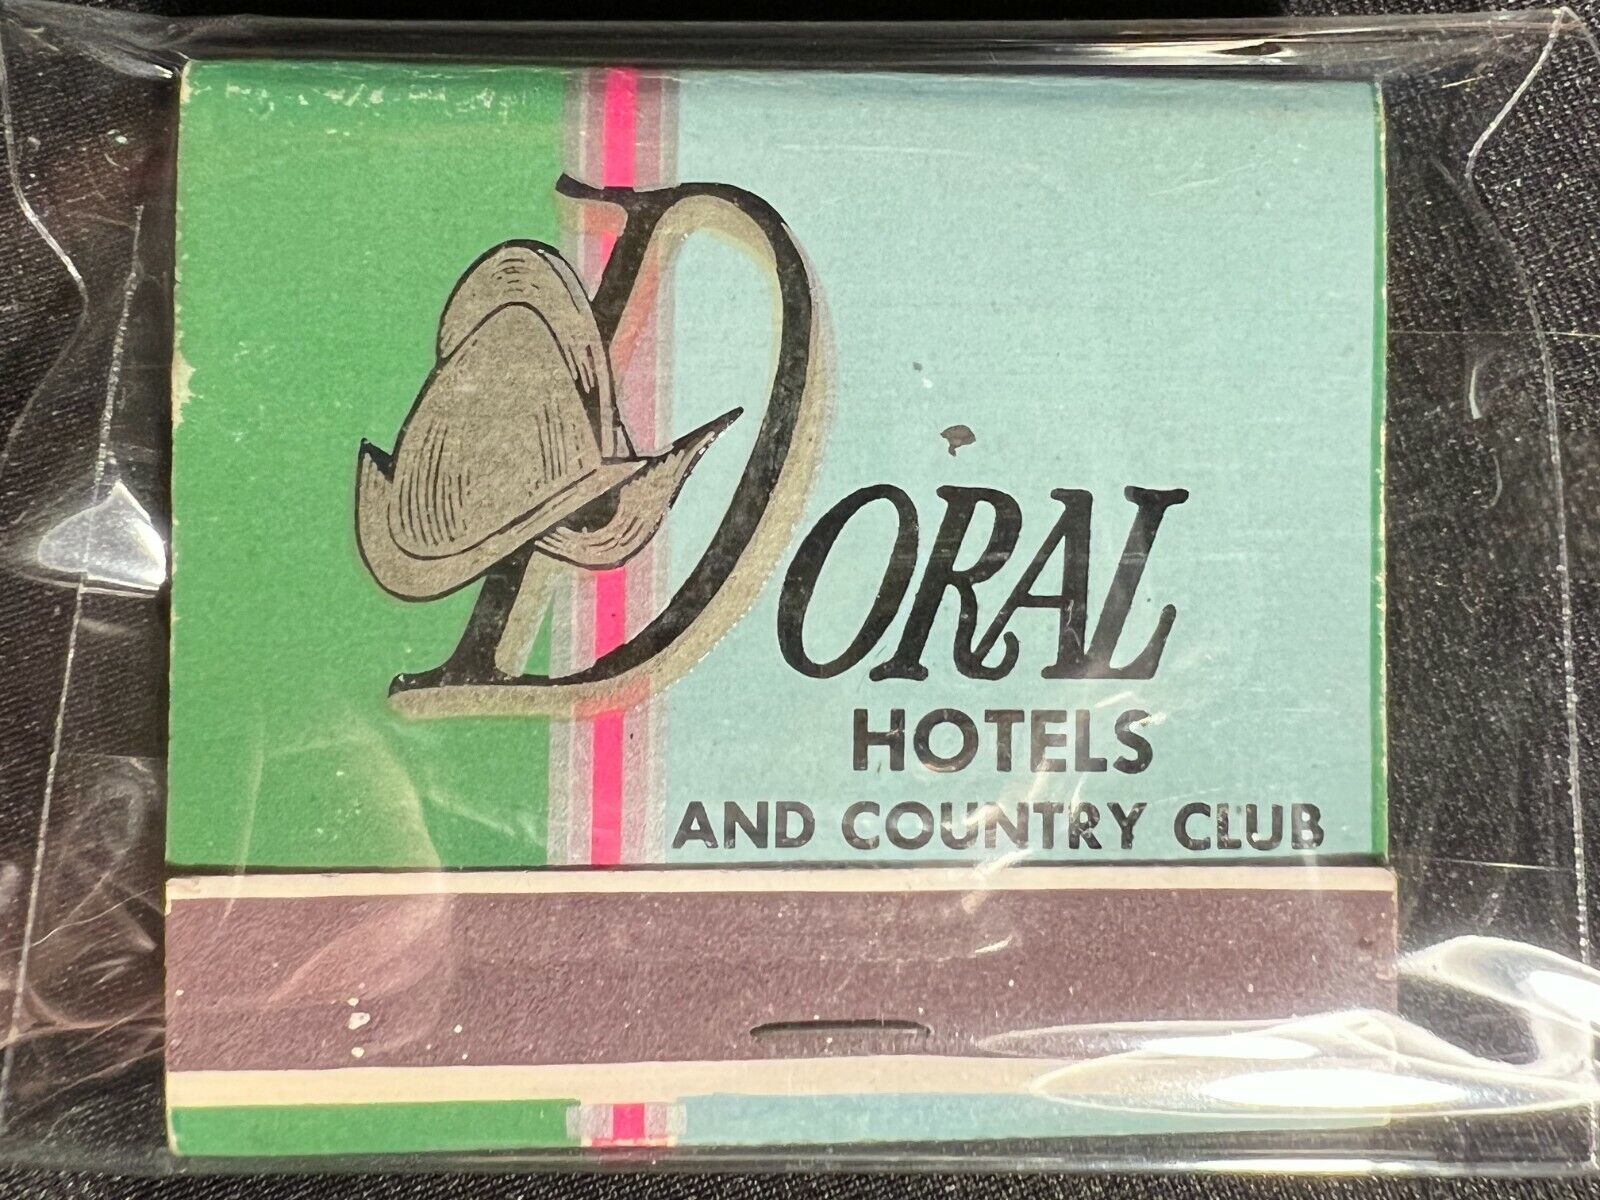 VINTAGE MATCHBOOK - DORAL HOTELS AND COUNTRY CLUB - MIAMI BEACH & NY - UNSTRUCK